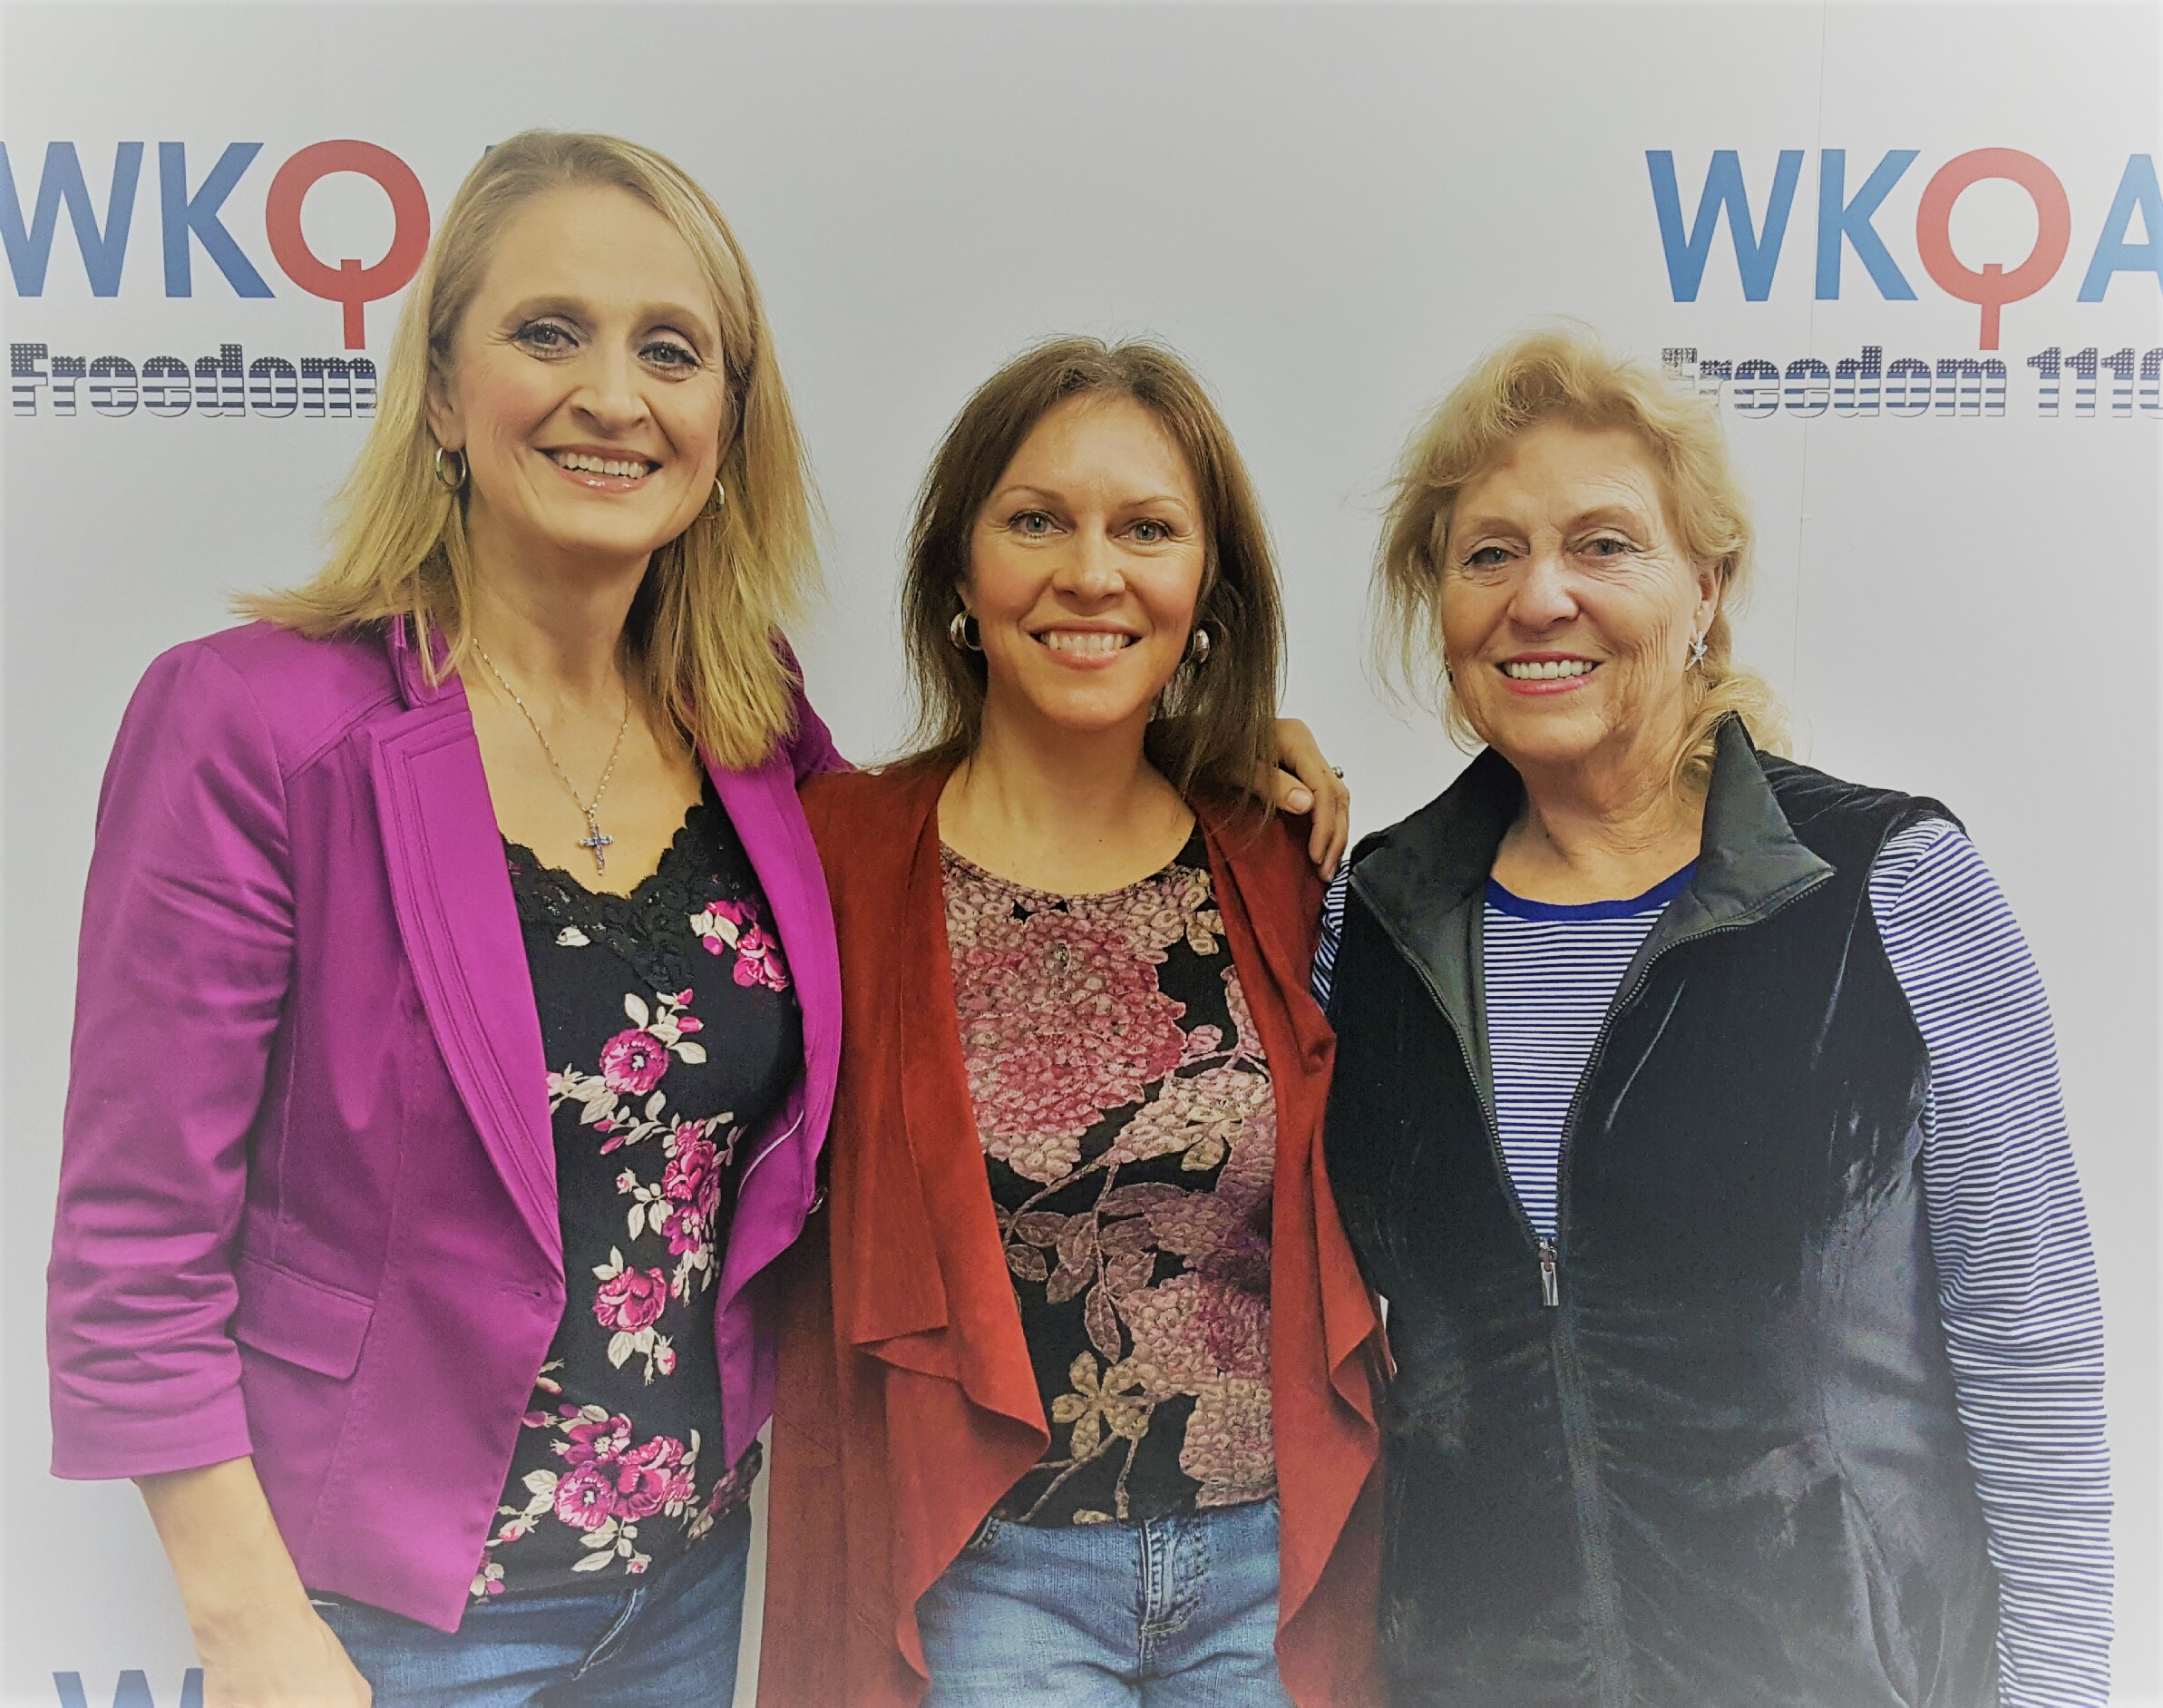 Dr. Christine Bacon with guests Nora Firestone and her mother Karen Wahl posing at the WKQA studios after a great discussion about gratitude. 